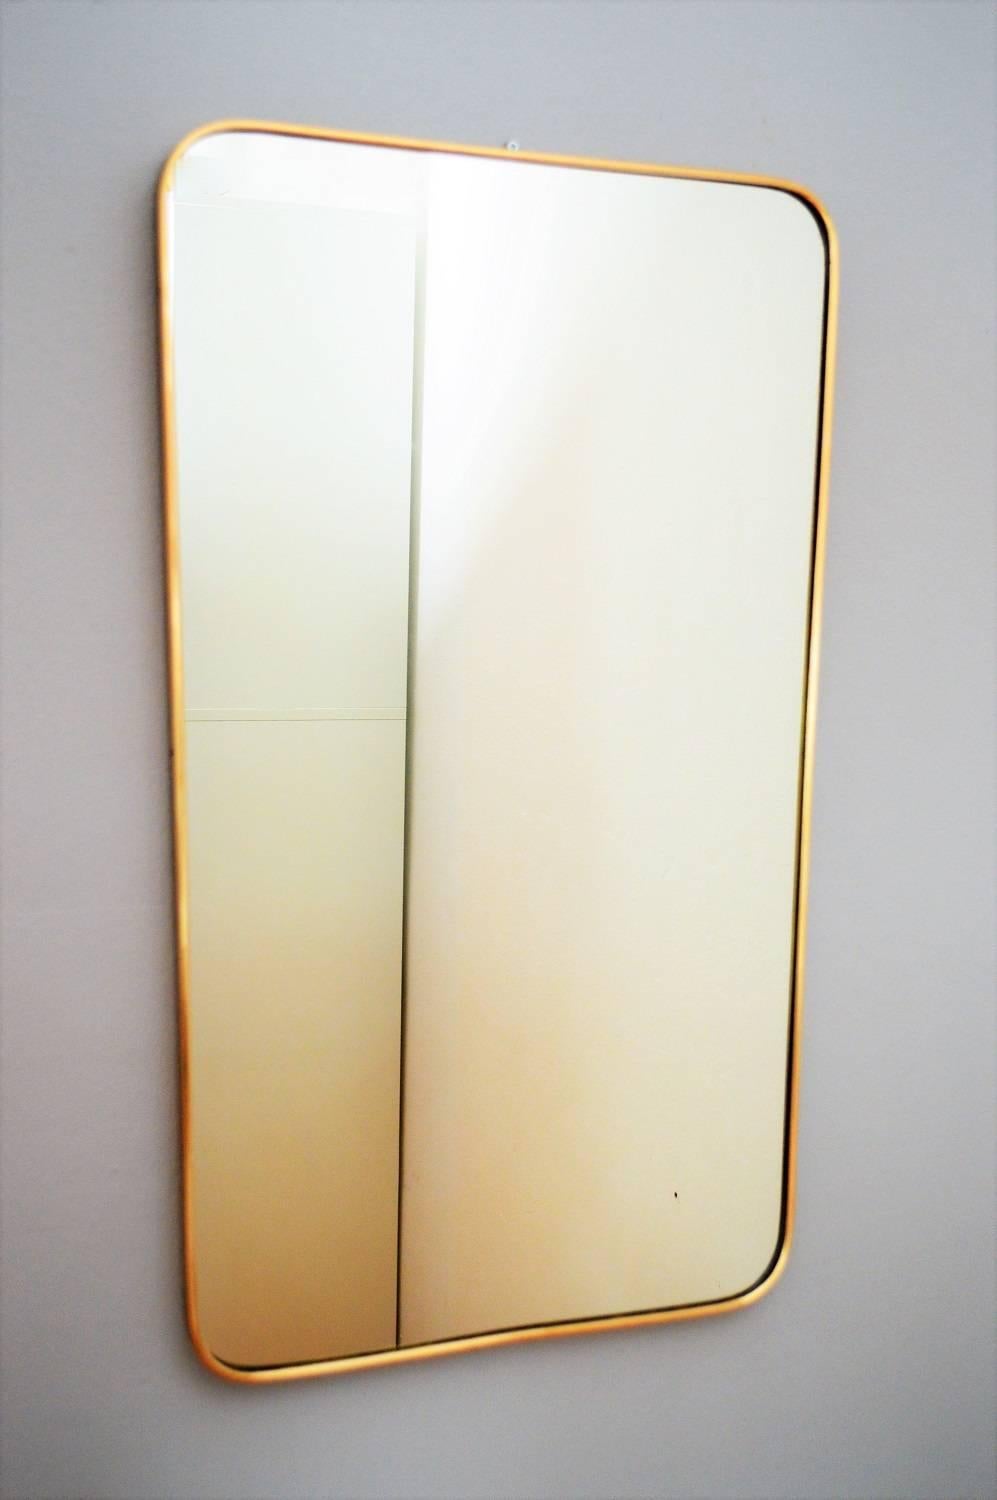 Beautiful big crystal glass wall mirror with brass frame, typical for the Italian Mid-Century Modern age.
Made in Italy from Sant'Ambrogio & De Berti in 1959. The original sticker is inside the mirror.
The mirror is in the original shape, the